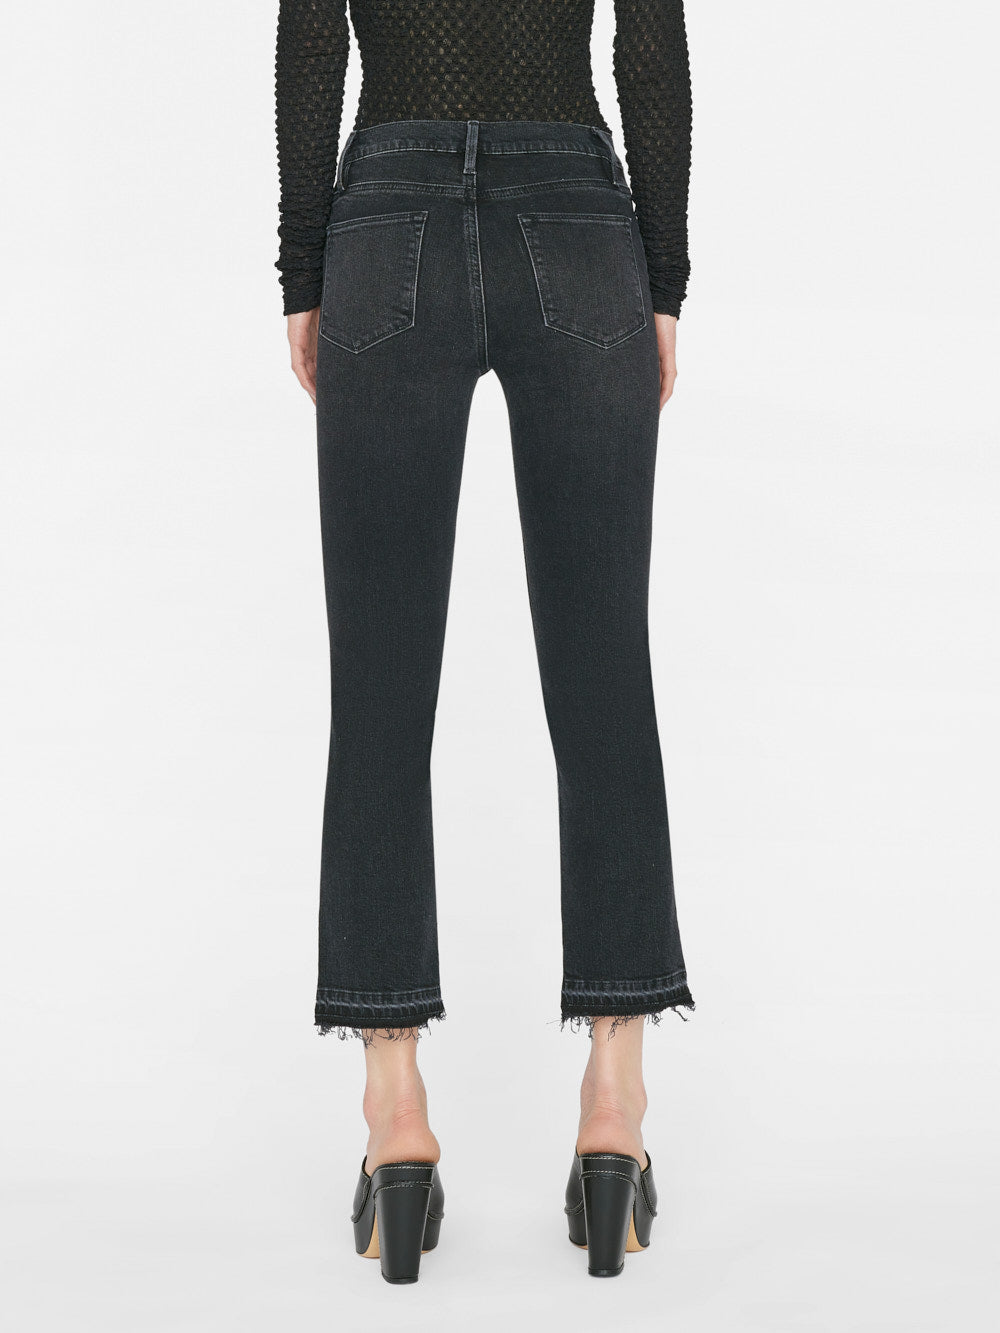 The back view of a woman wearing Frame Le High Straight Released Hem - Hutchison jeans with frayed hems.